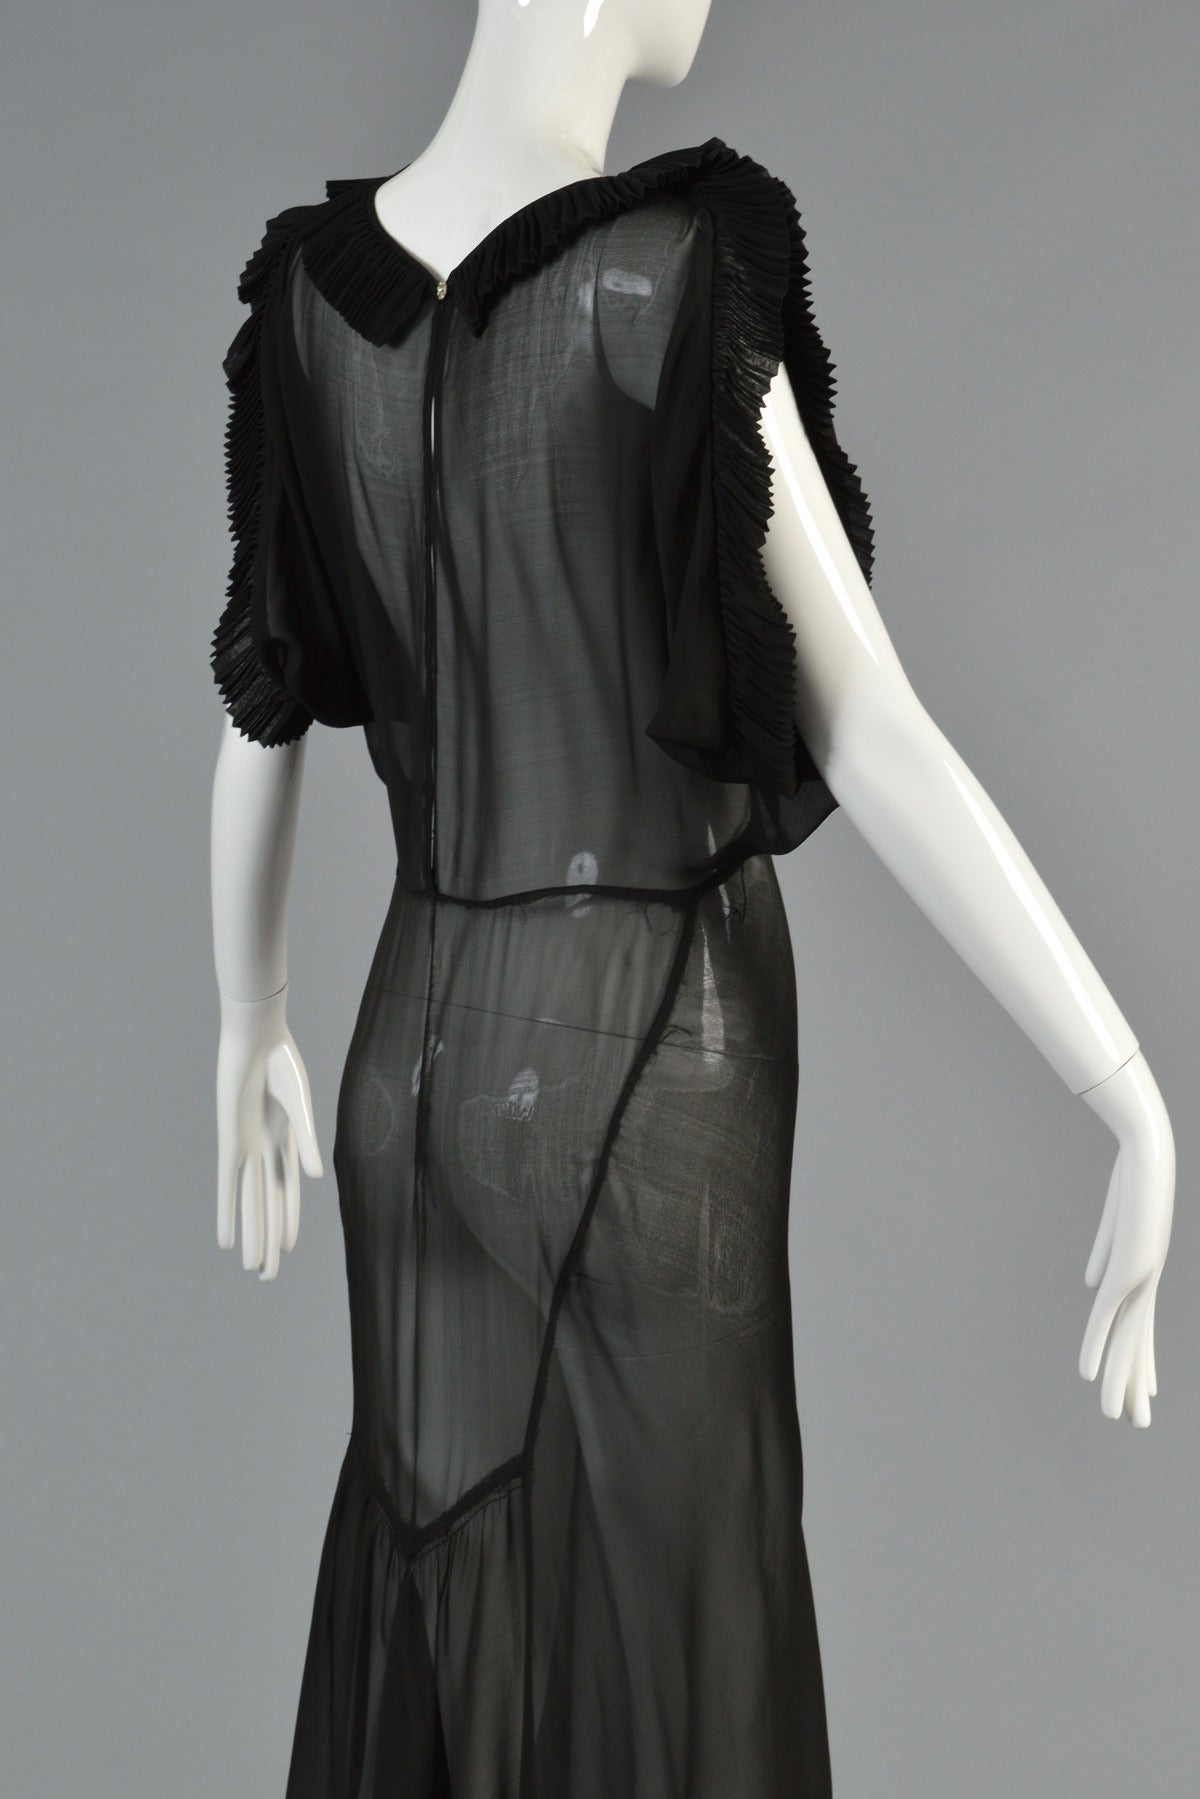 1930's Black Sheer Evening Gown with Open Draped Sleeves For Sale 5